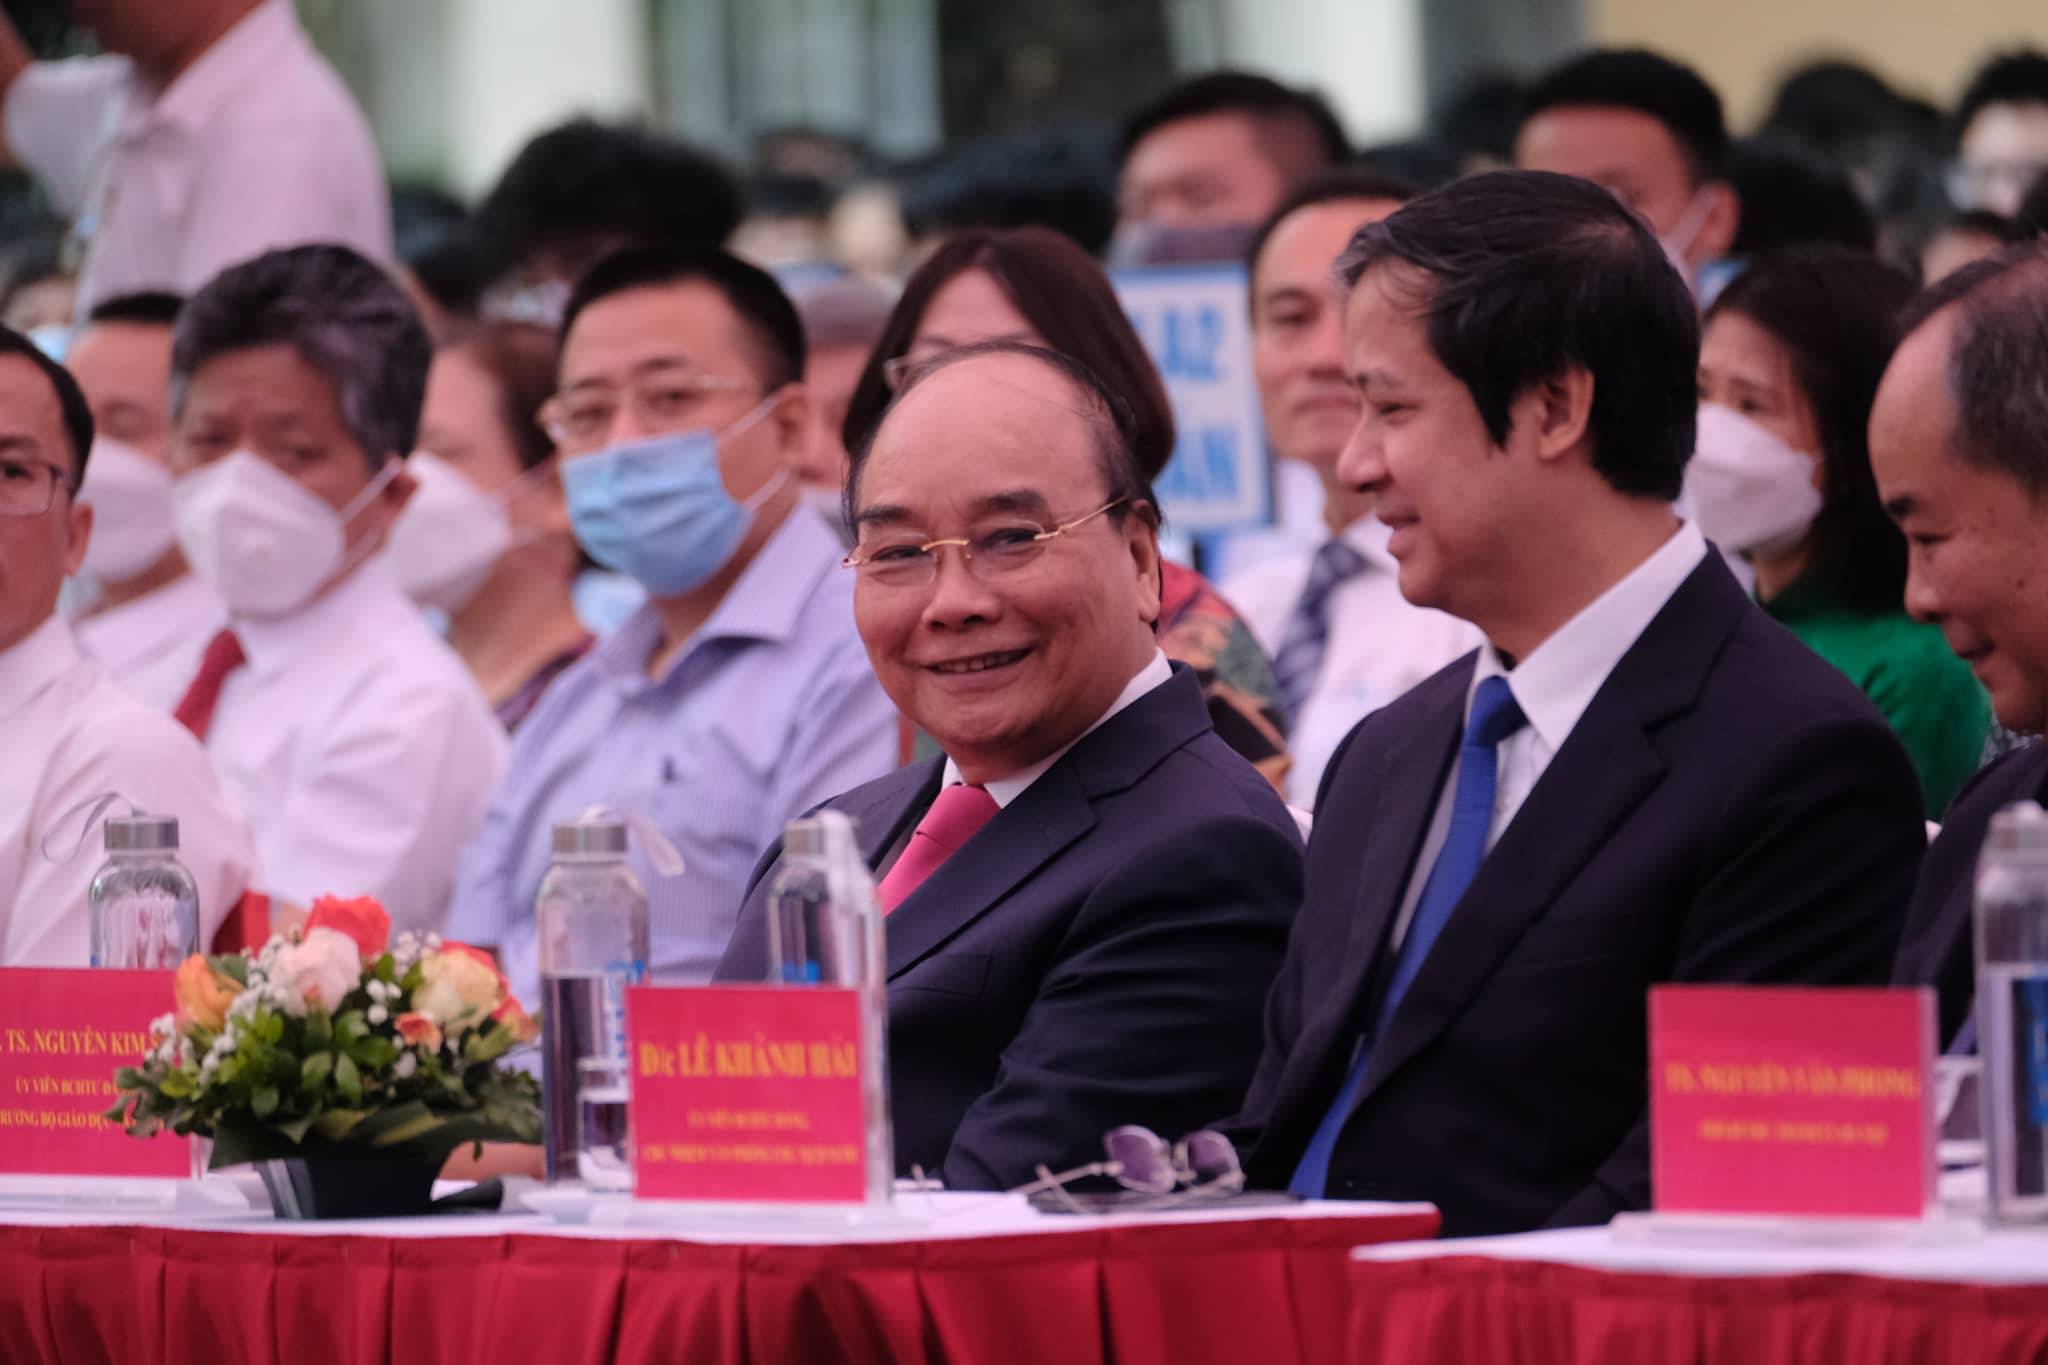 State President Nguyen Xuan Phuc (C) and Minister of Education and Training Nguyen Kim Son (R) attend the school opening ceremony at HUS High School for Gifted Students in Hanoi, September 5, 2022. Photo: Nam Tran / Tuoi Tre